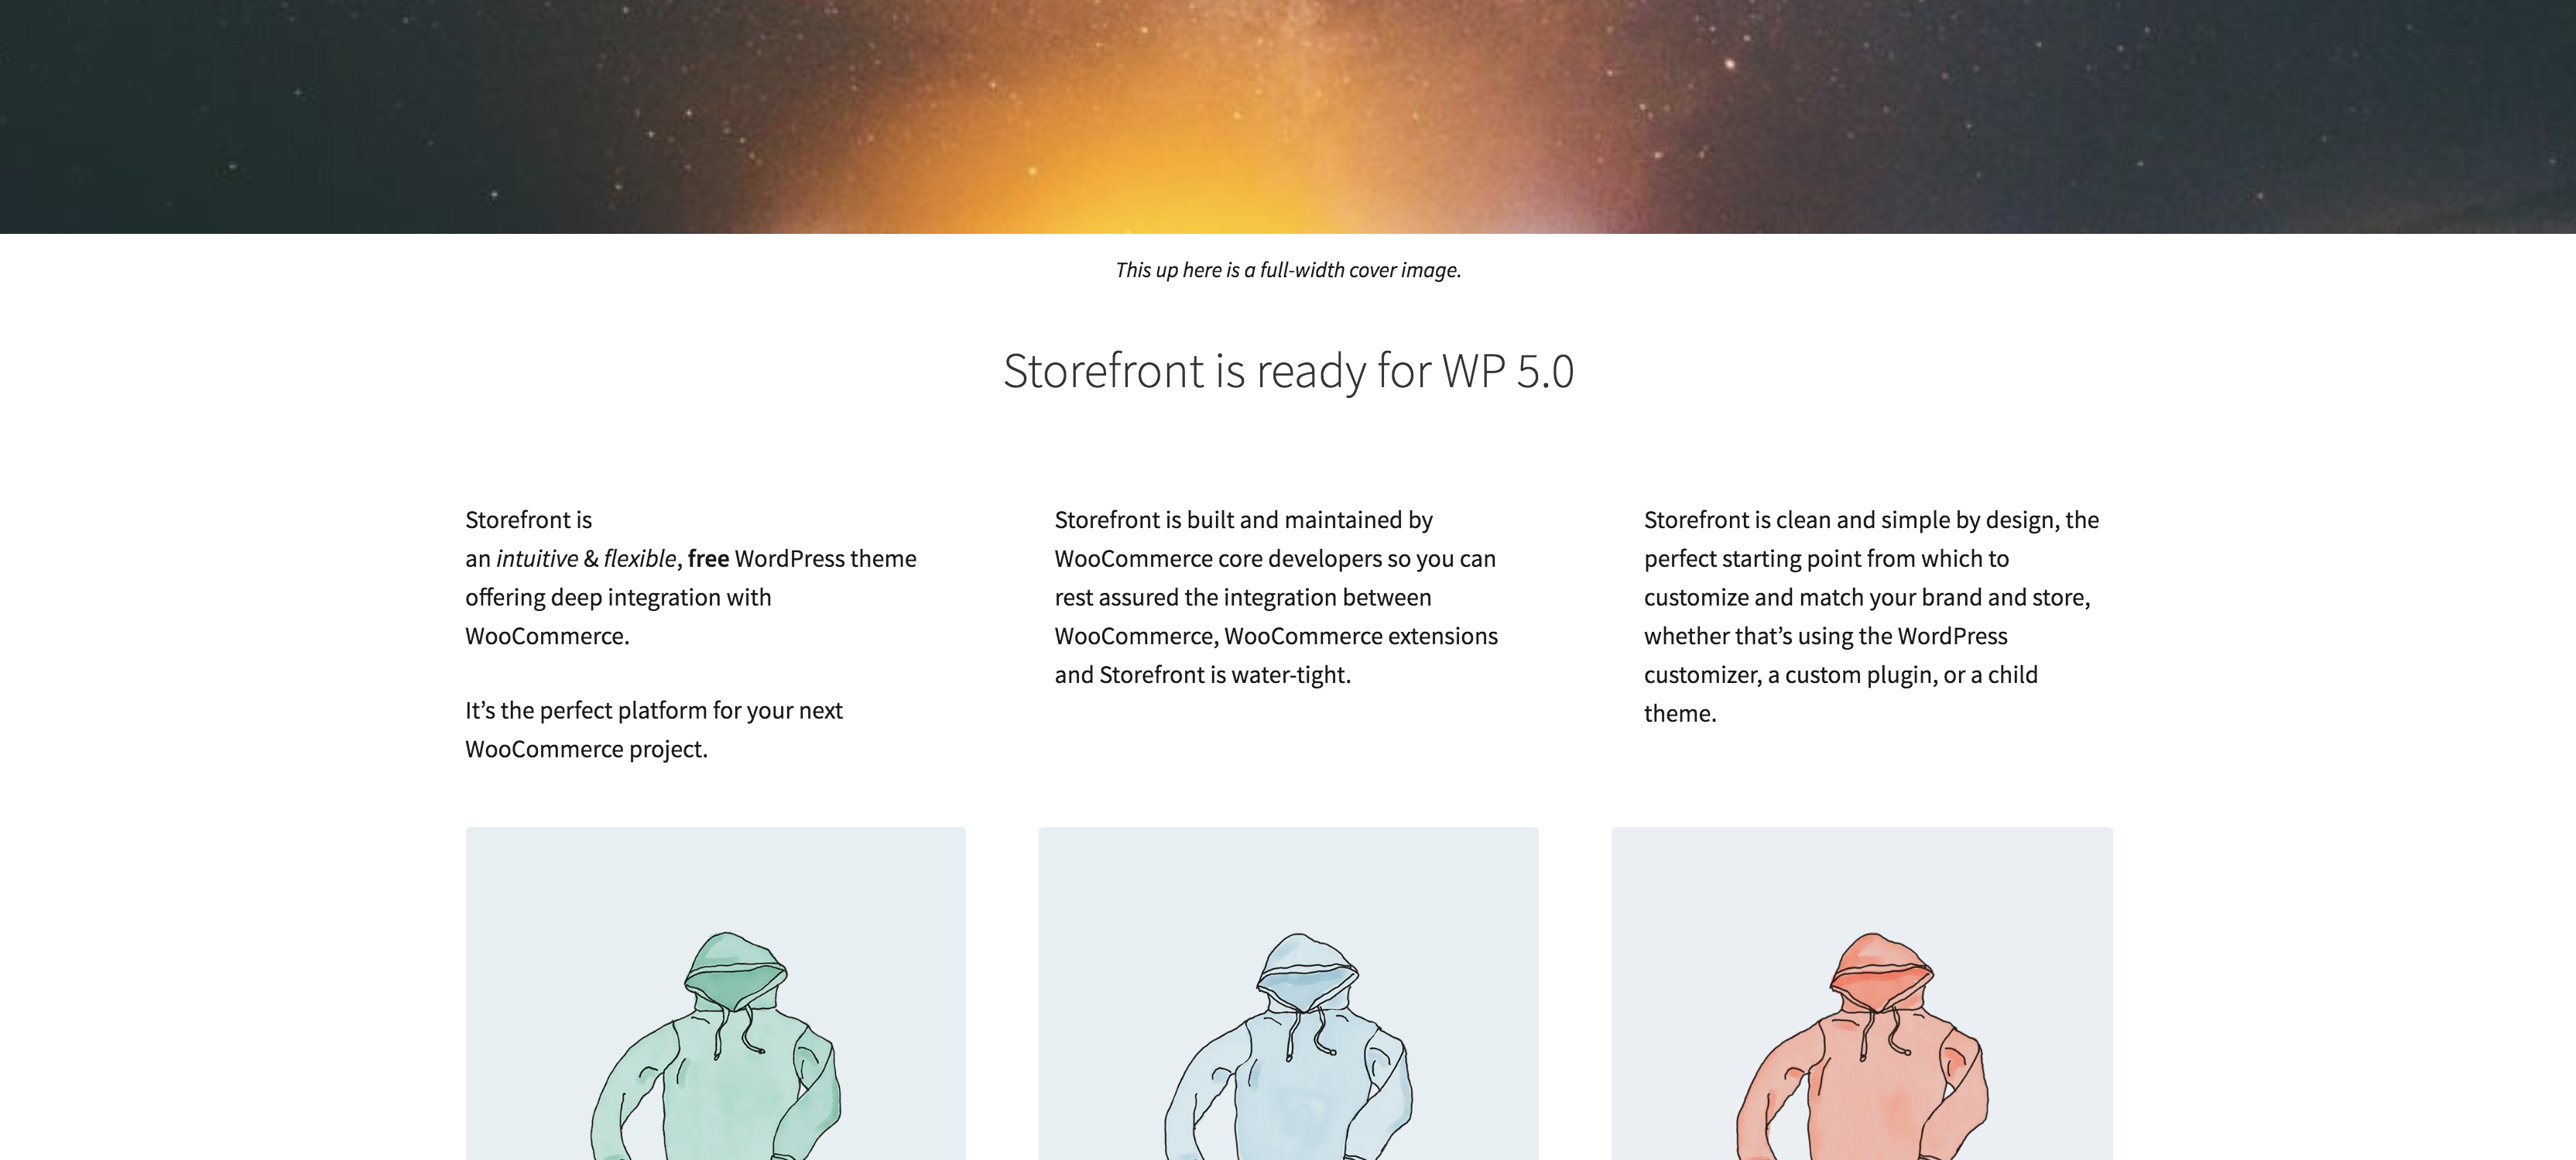 Storefront 2.4 and higher supports all of the new blocks introduced in WordPress 5.0